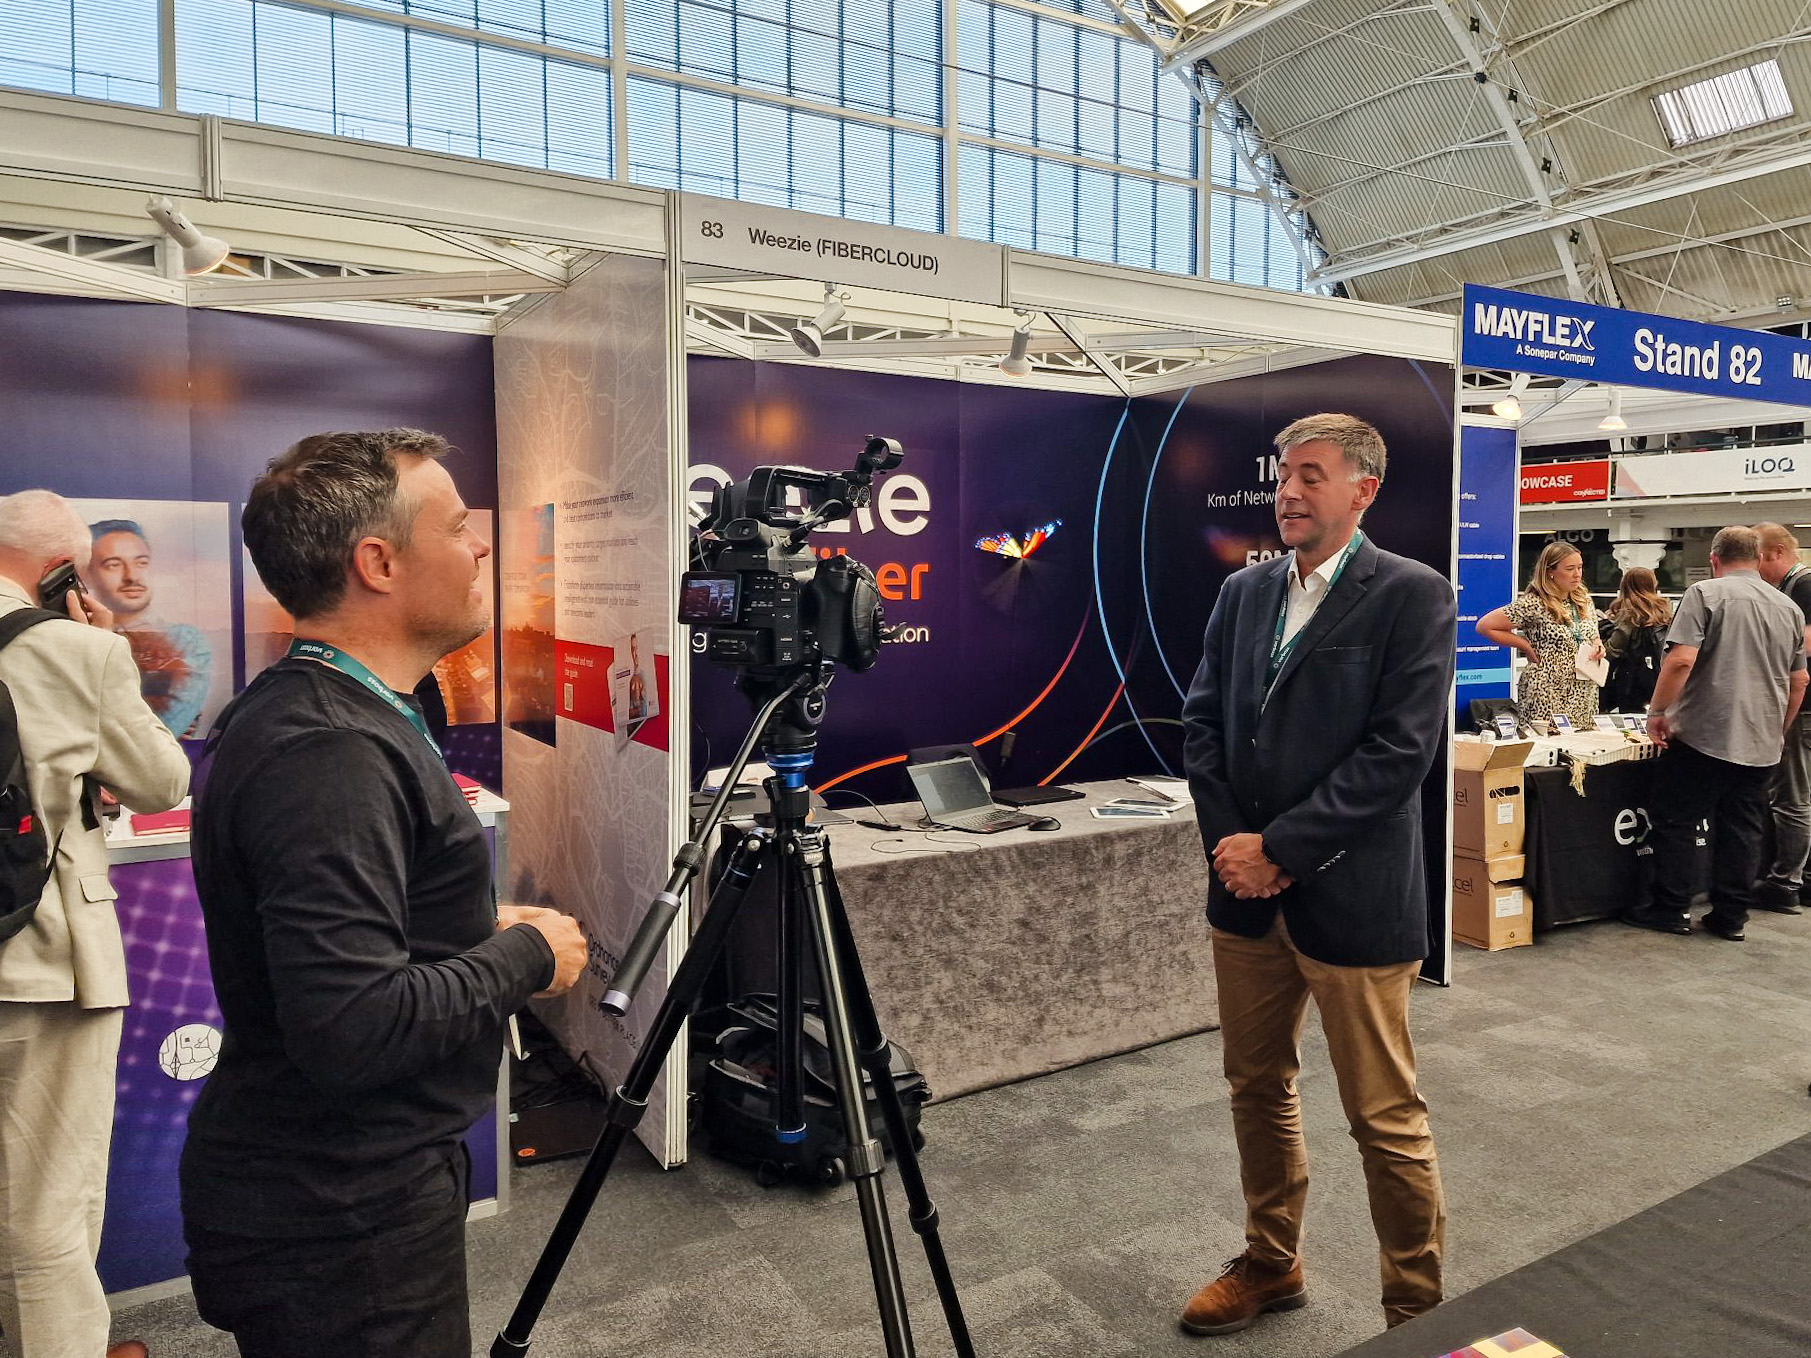 Weezie's CEO was interviewed at Connected Britain